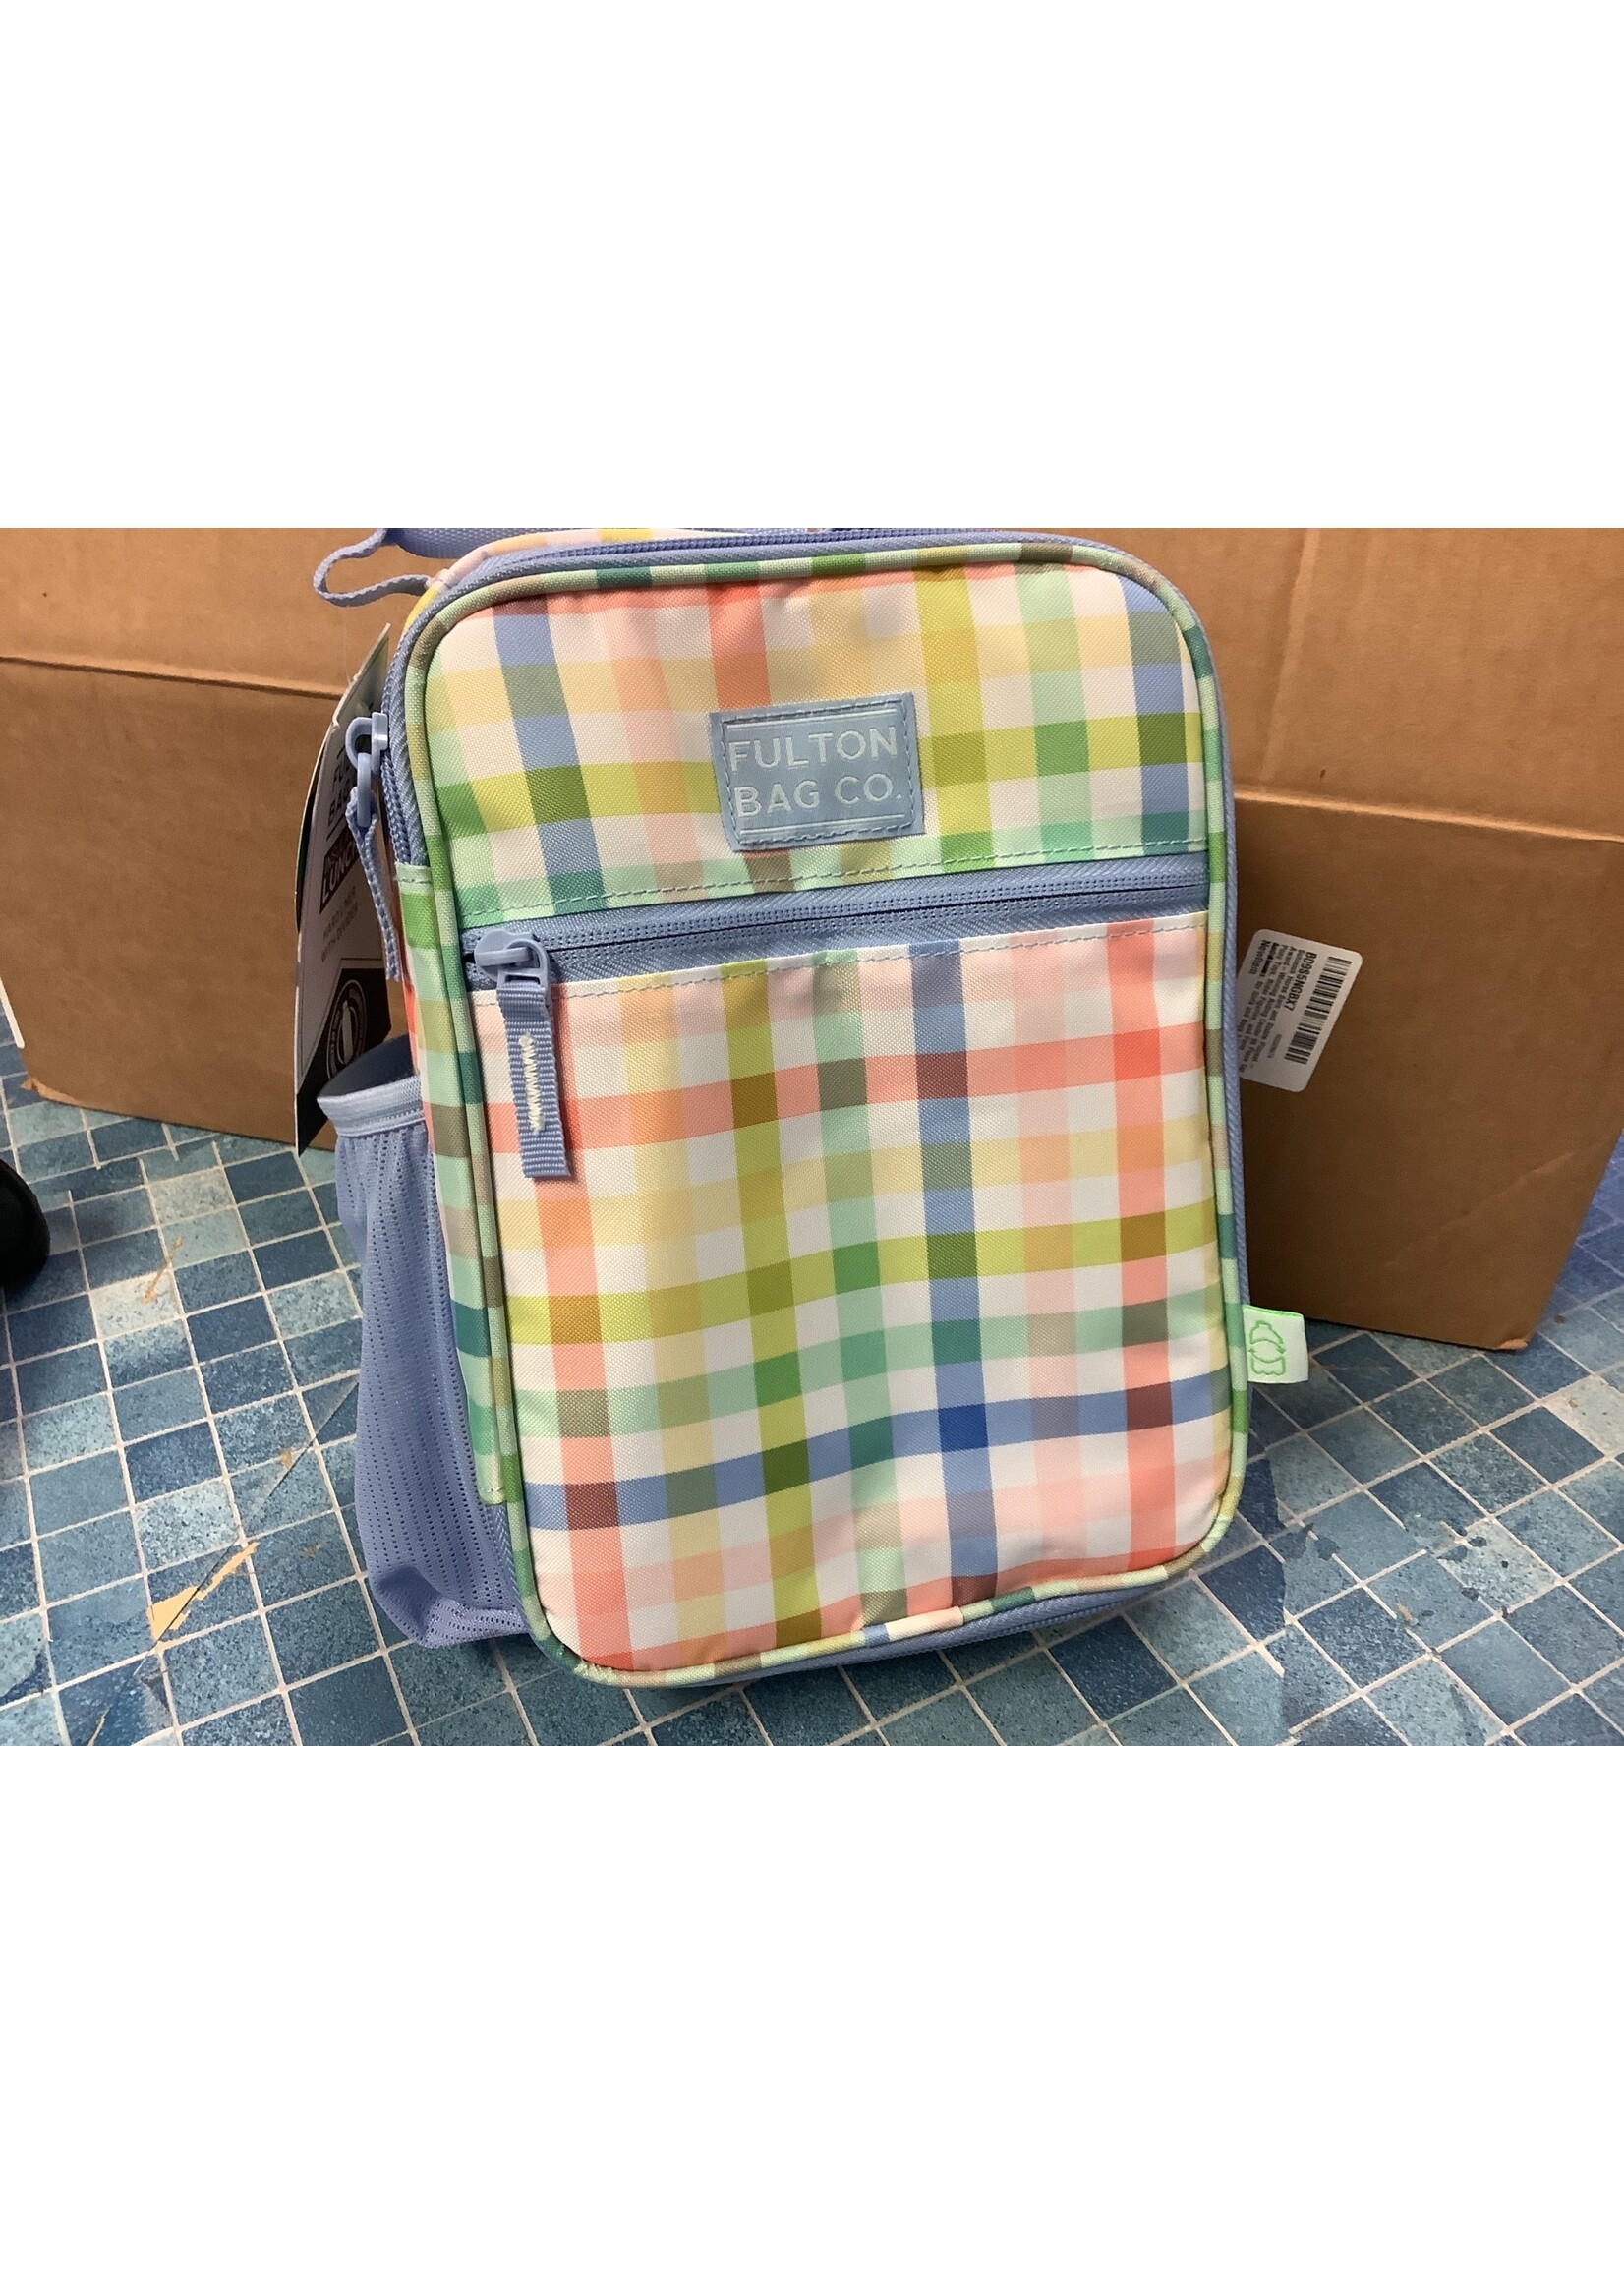 Fulton Bag Co. Upright Lunch Pack - Pastel Rainbow Gingham